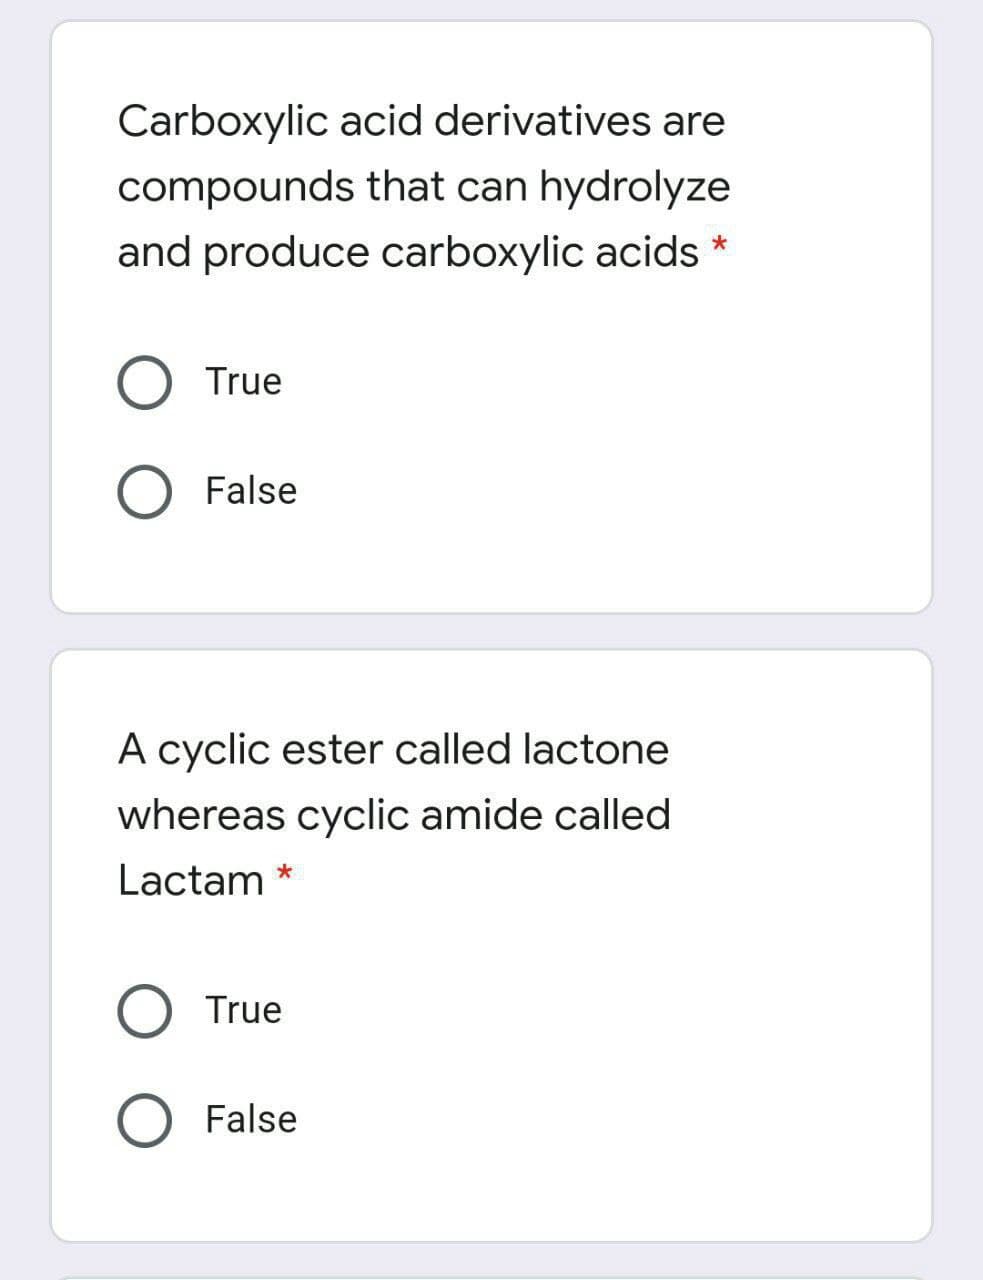 Carboxylic acid derivatives are
compounds that can hydrolyze
and produce carboxylic acids
True
False
A cyclic ester called lactone
whereas cyclic amide called
Lactam *
O True
O False
